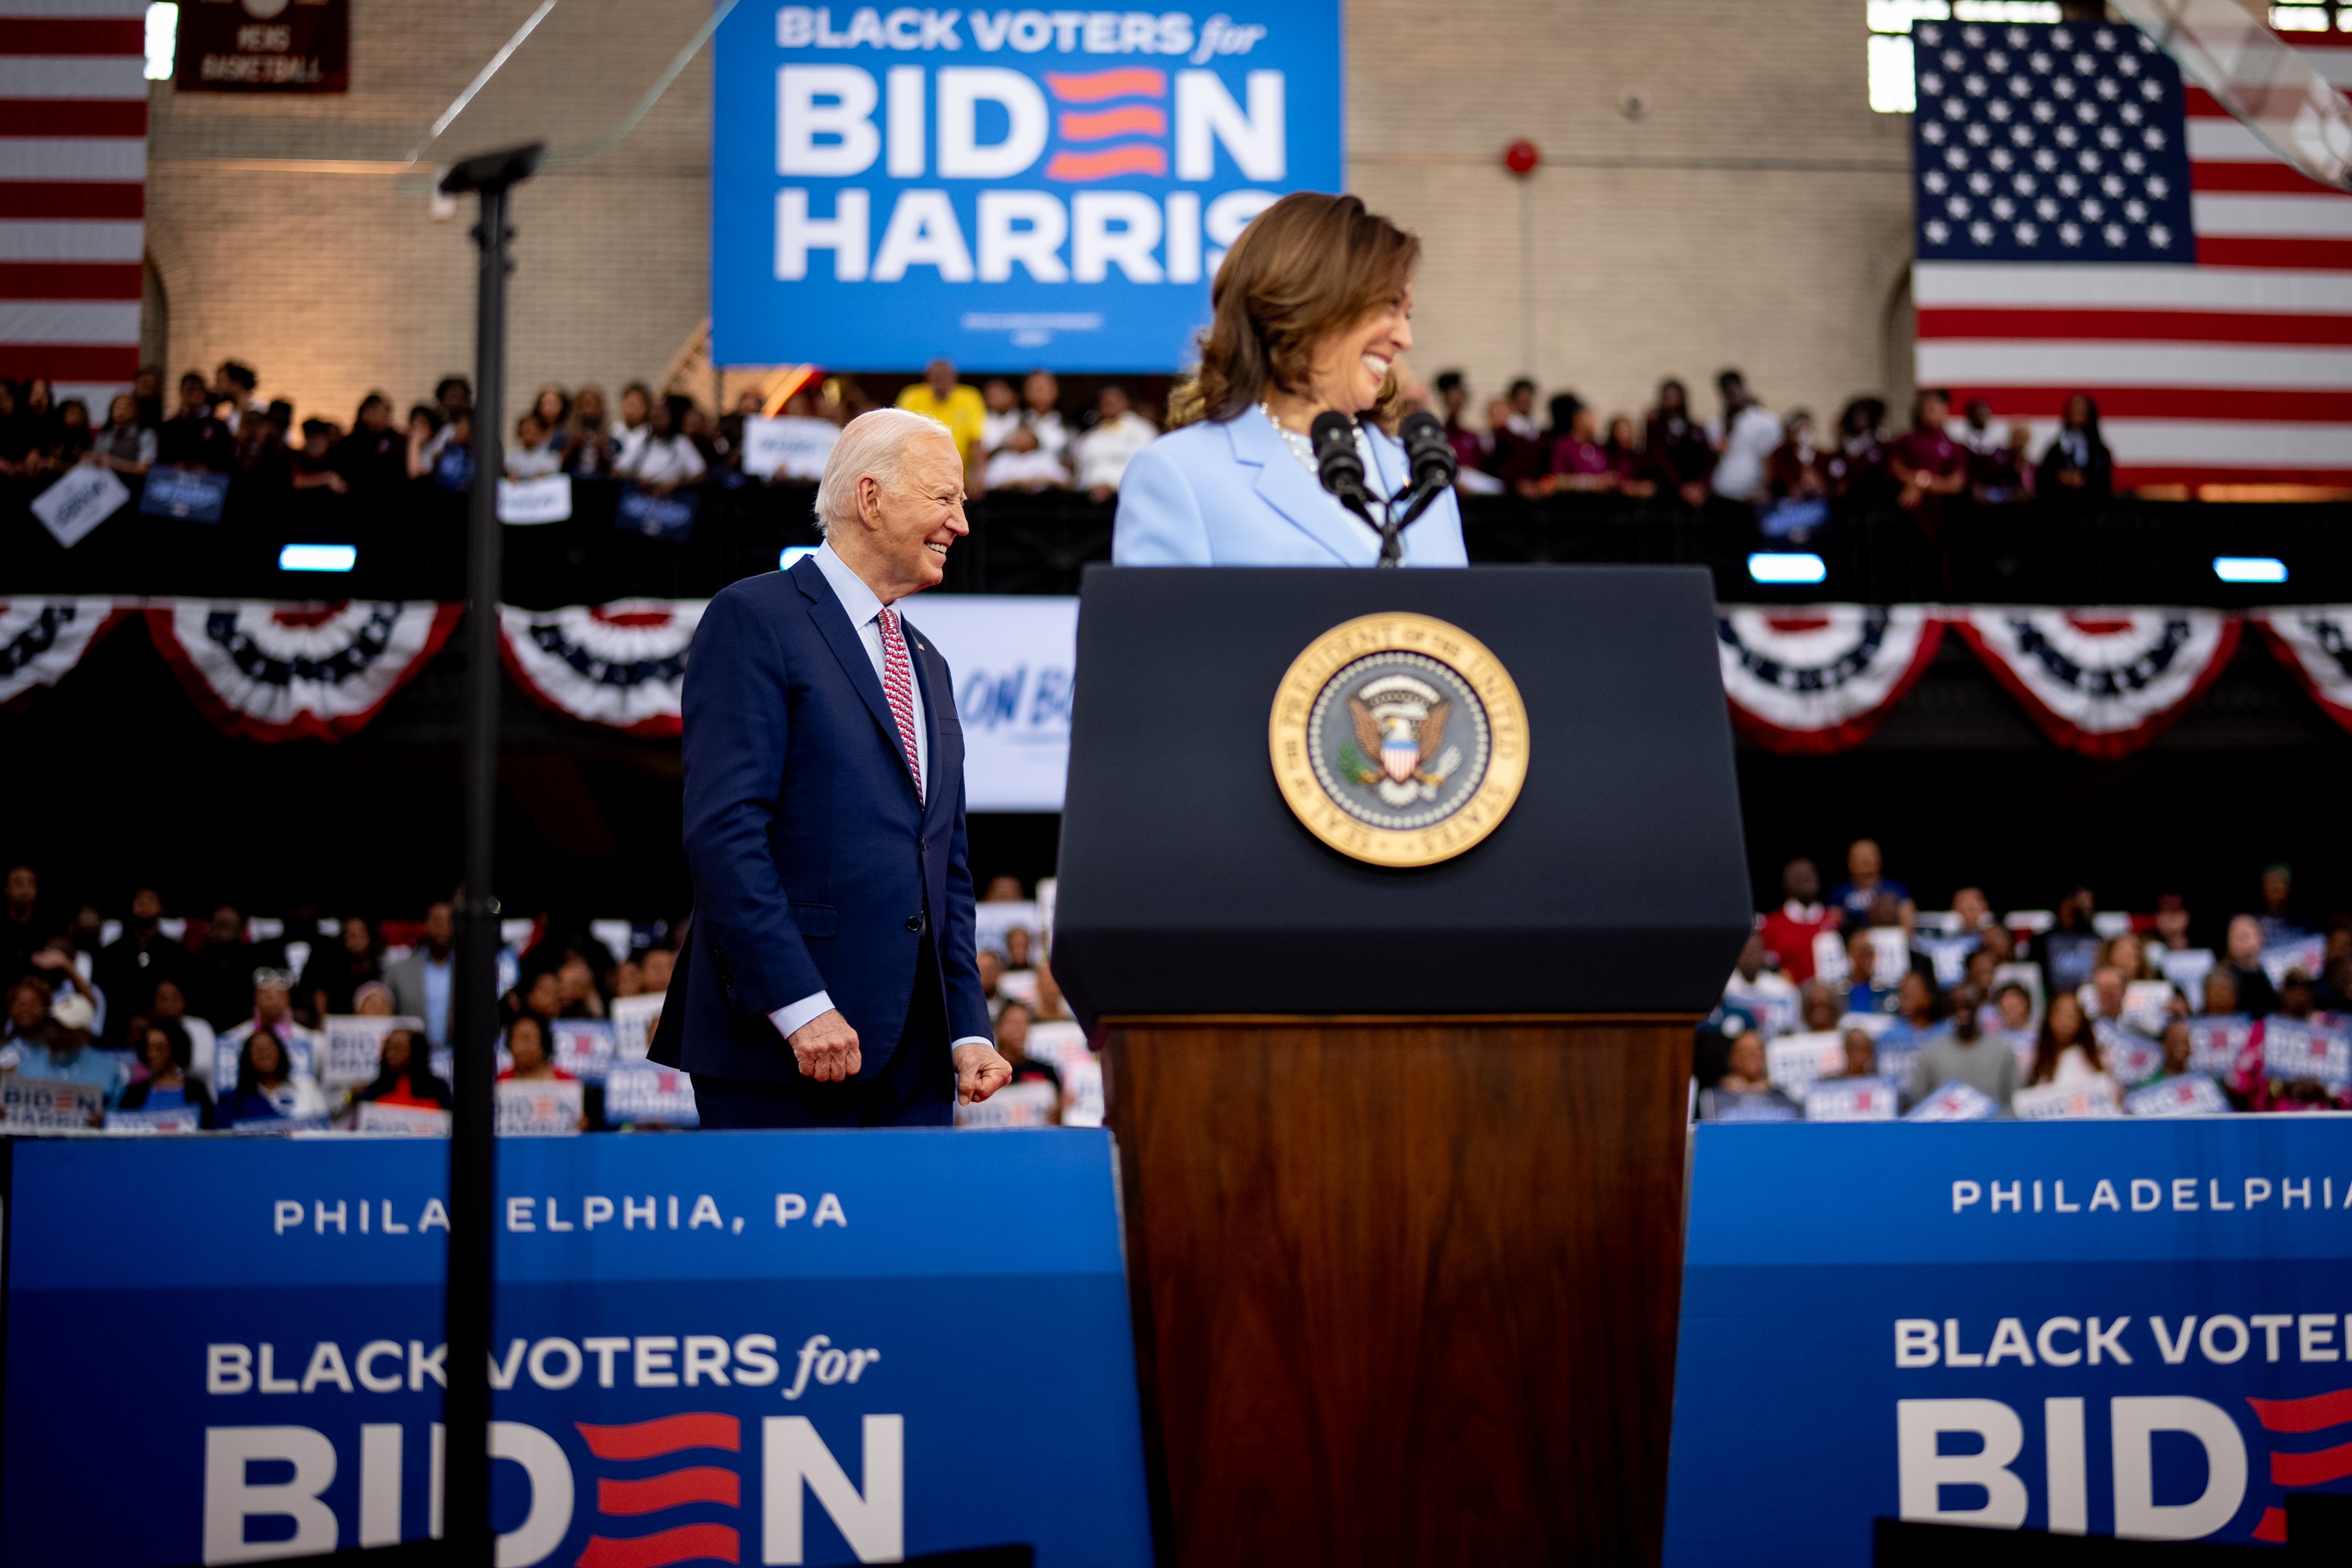 PHILADELPHIA, PENNSYLVANIA - MAY 29: U.S. Vice President Kamala Harris introduces U.S. President Joe Biden during a campaign rally at Girard College on May 29, 2024 in Philadelphia, Pennsylvania. Biden and Harris are using today's rally to launch a nationwide campaign to court black voters, a group that has traditionally come out in favor of Biden, but their support is projected lower than it was in 2020. (Photo by Andrew Harnik/Getty Images)